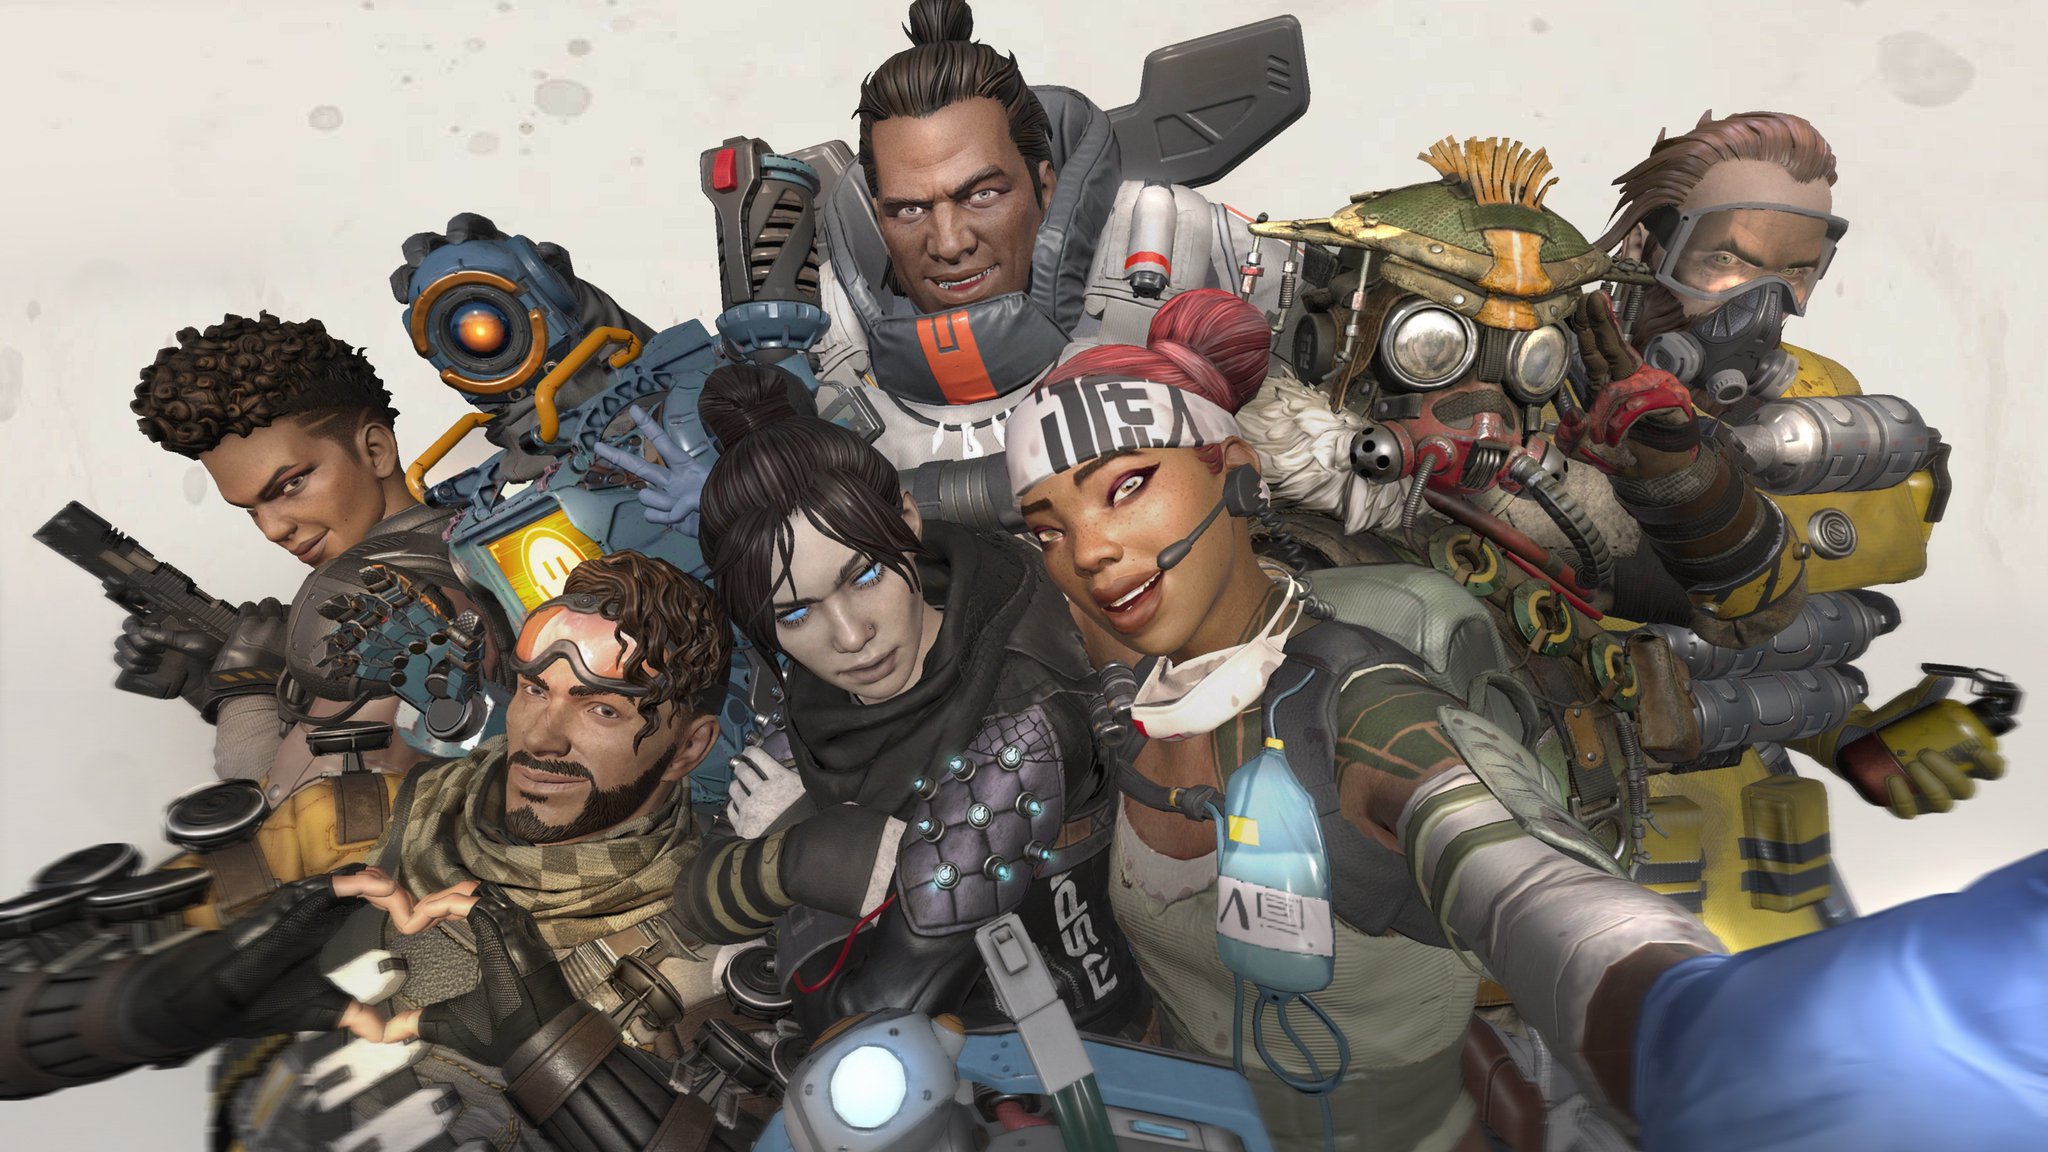 Apex Legends eclipsed Fortnite on Twitch in its first week